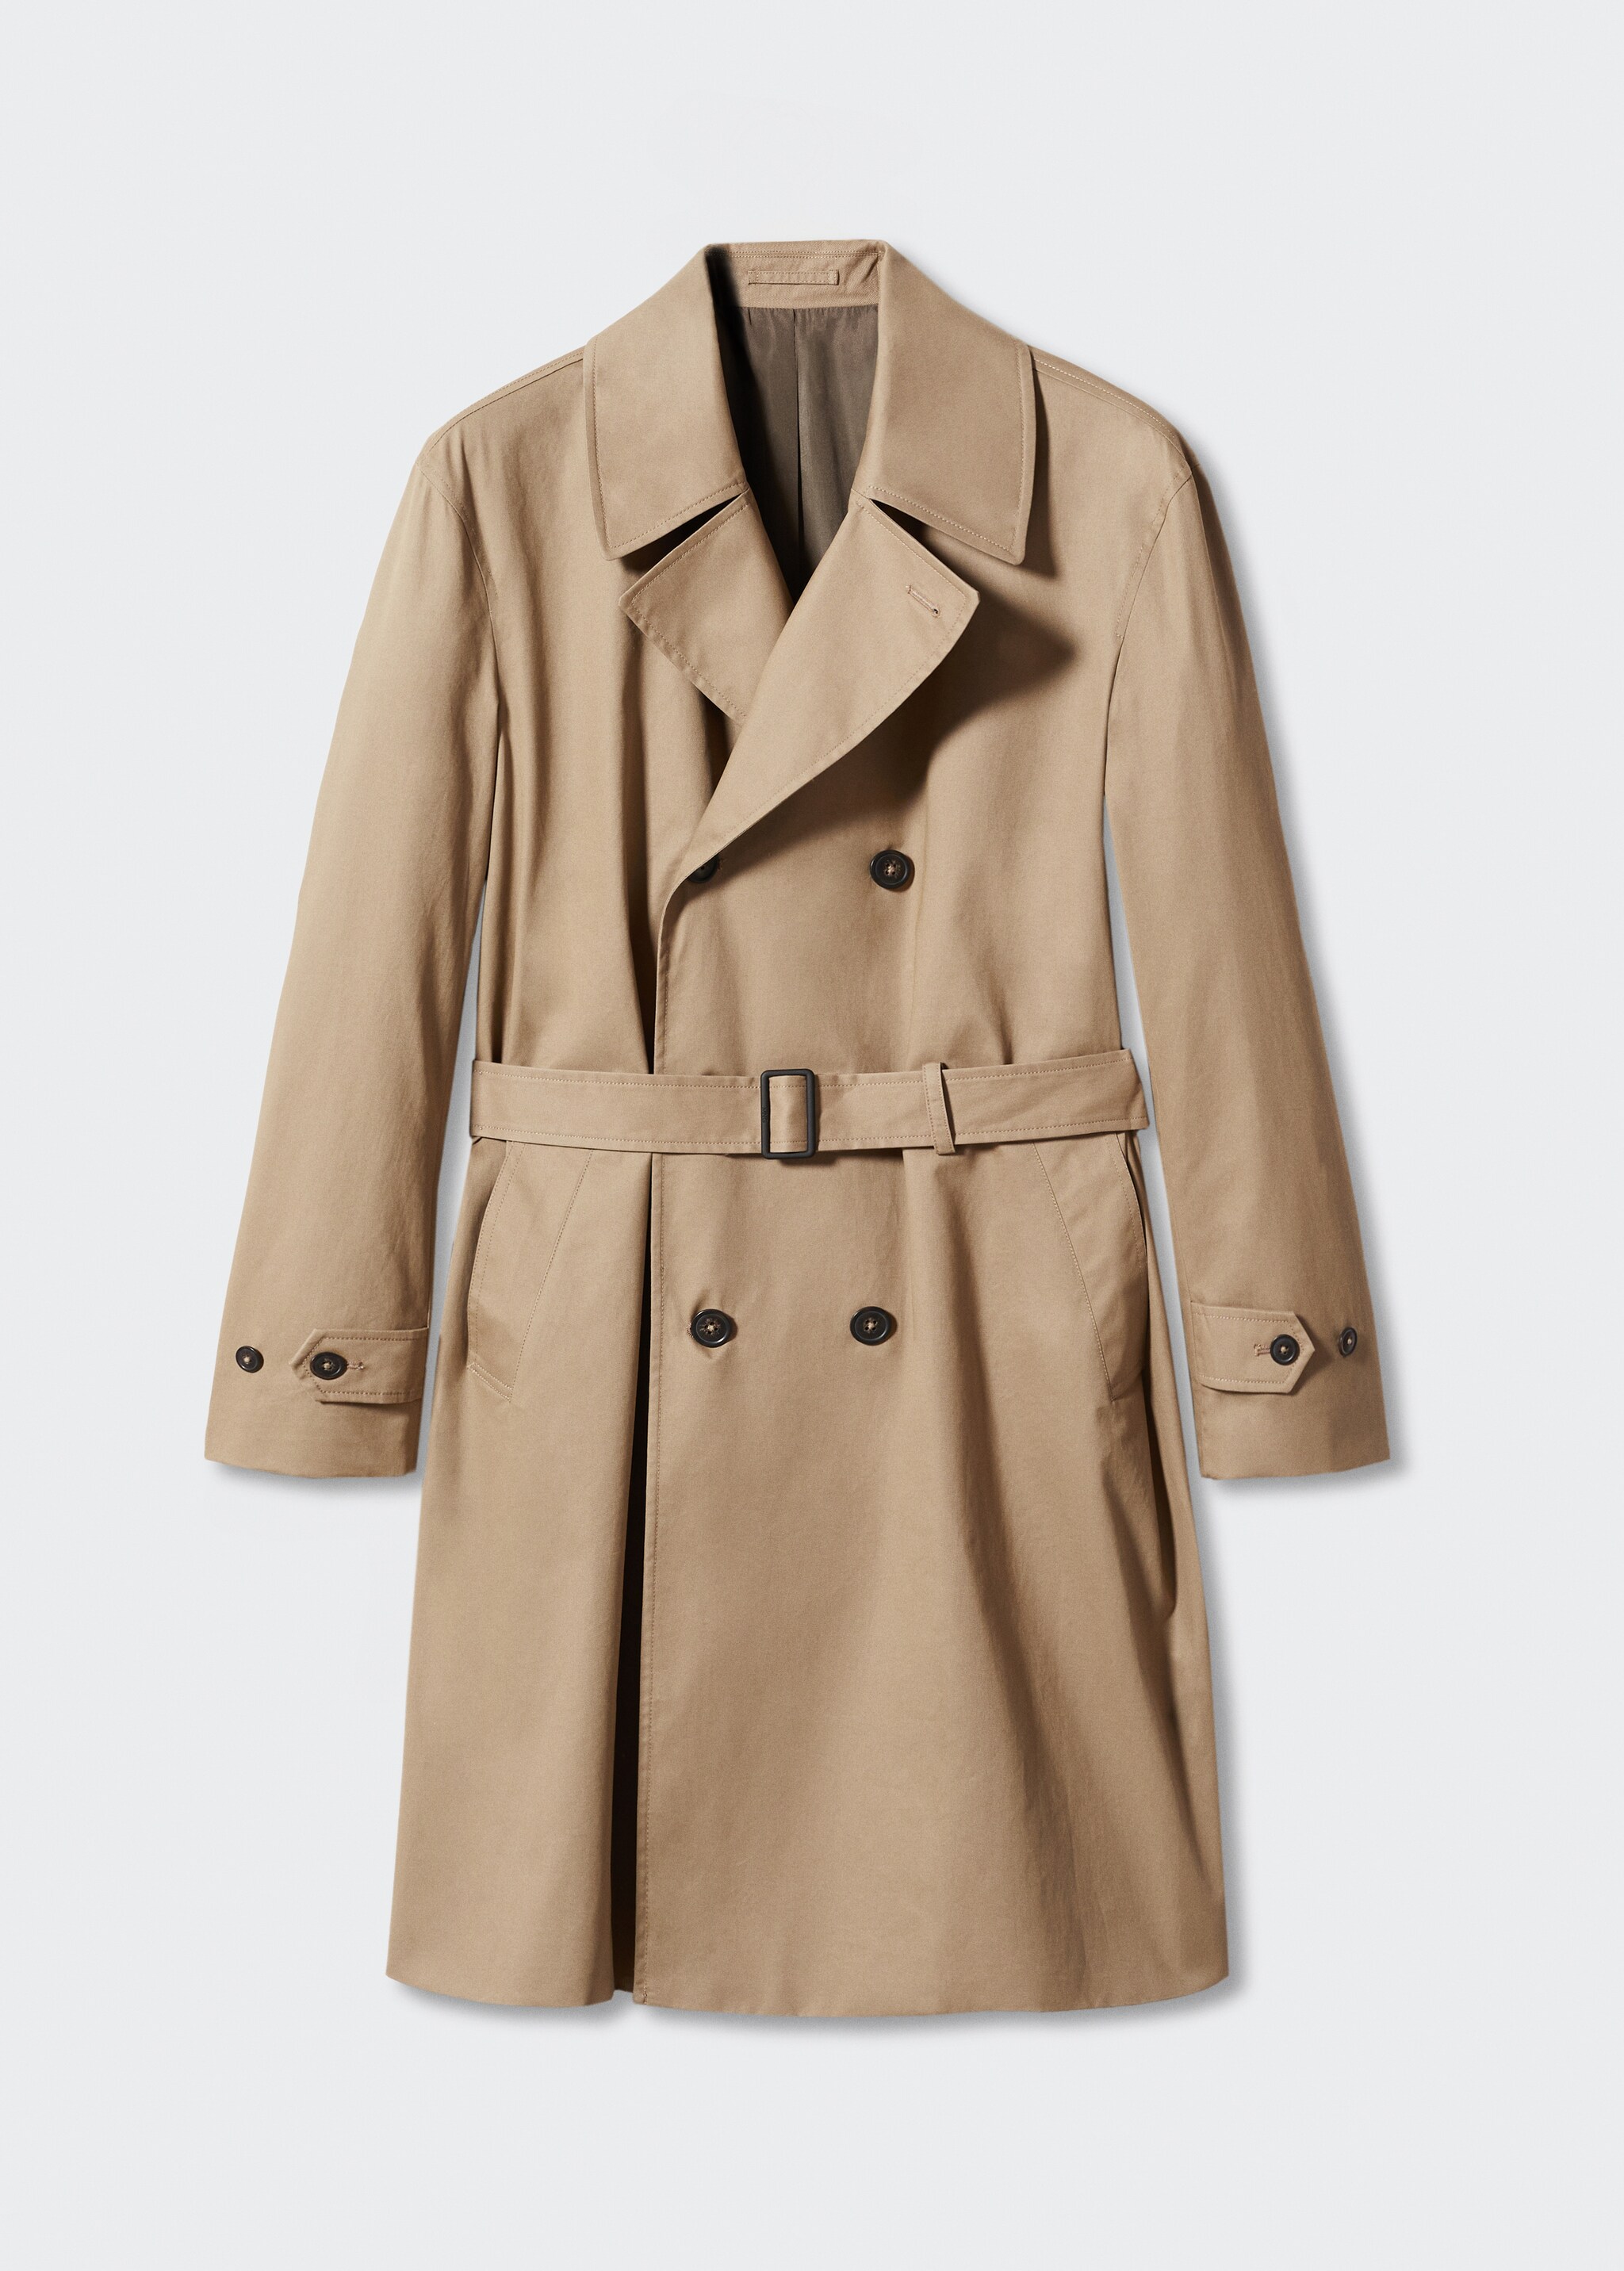 Classic 100% cotton trench coat - Article without model